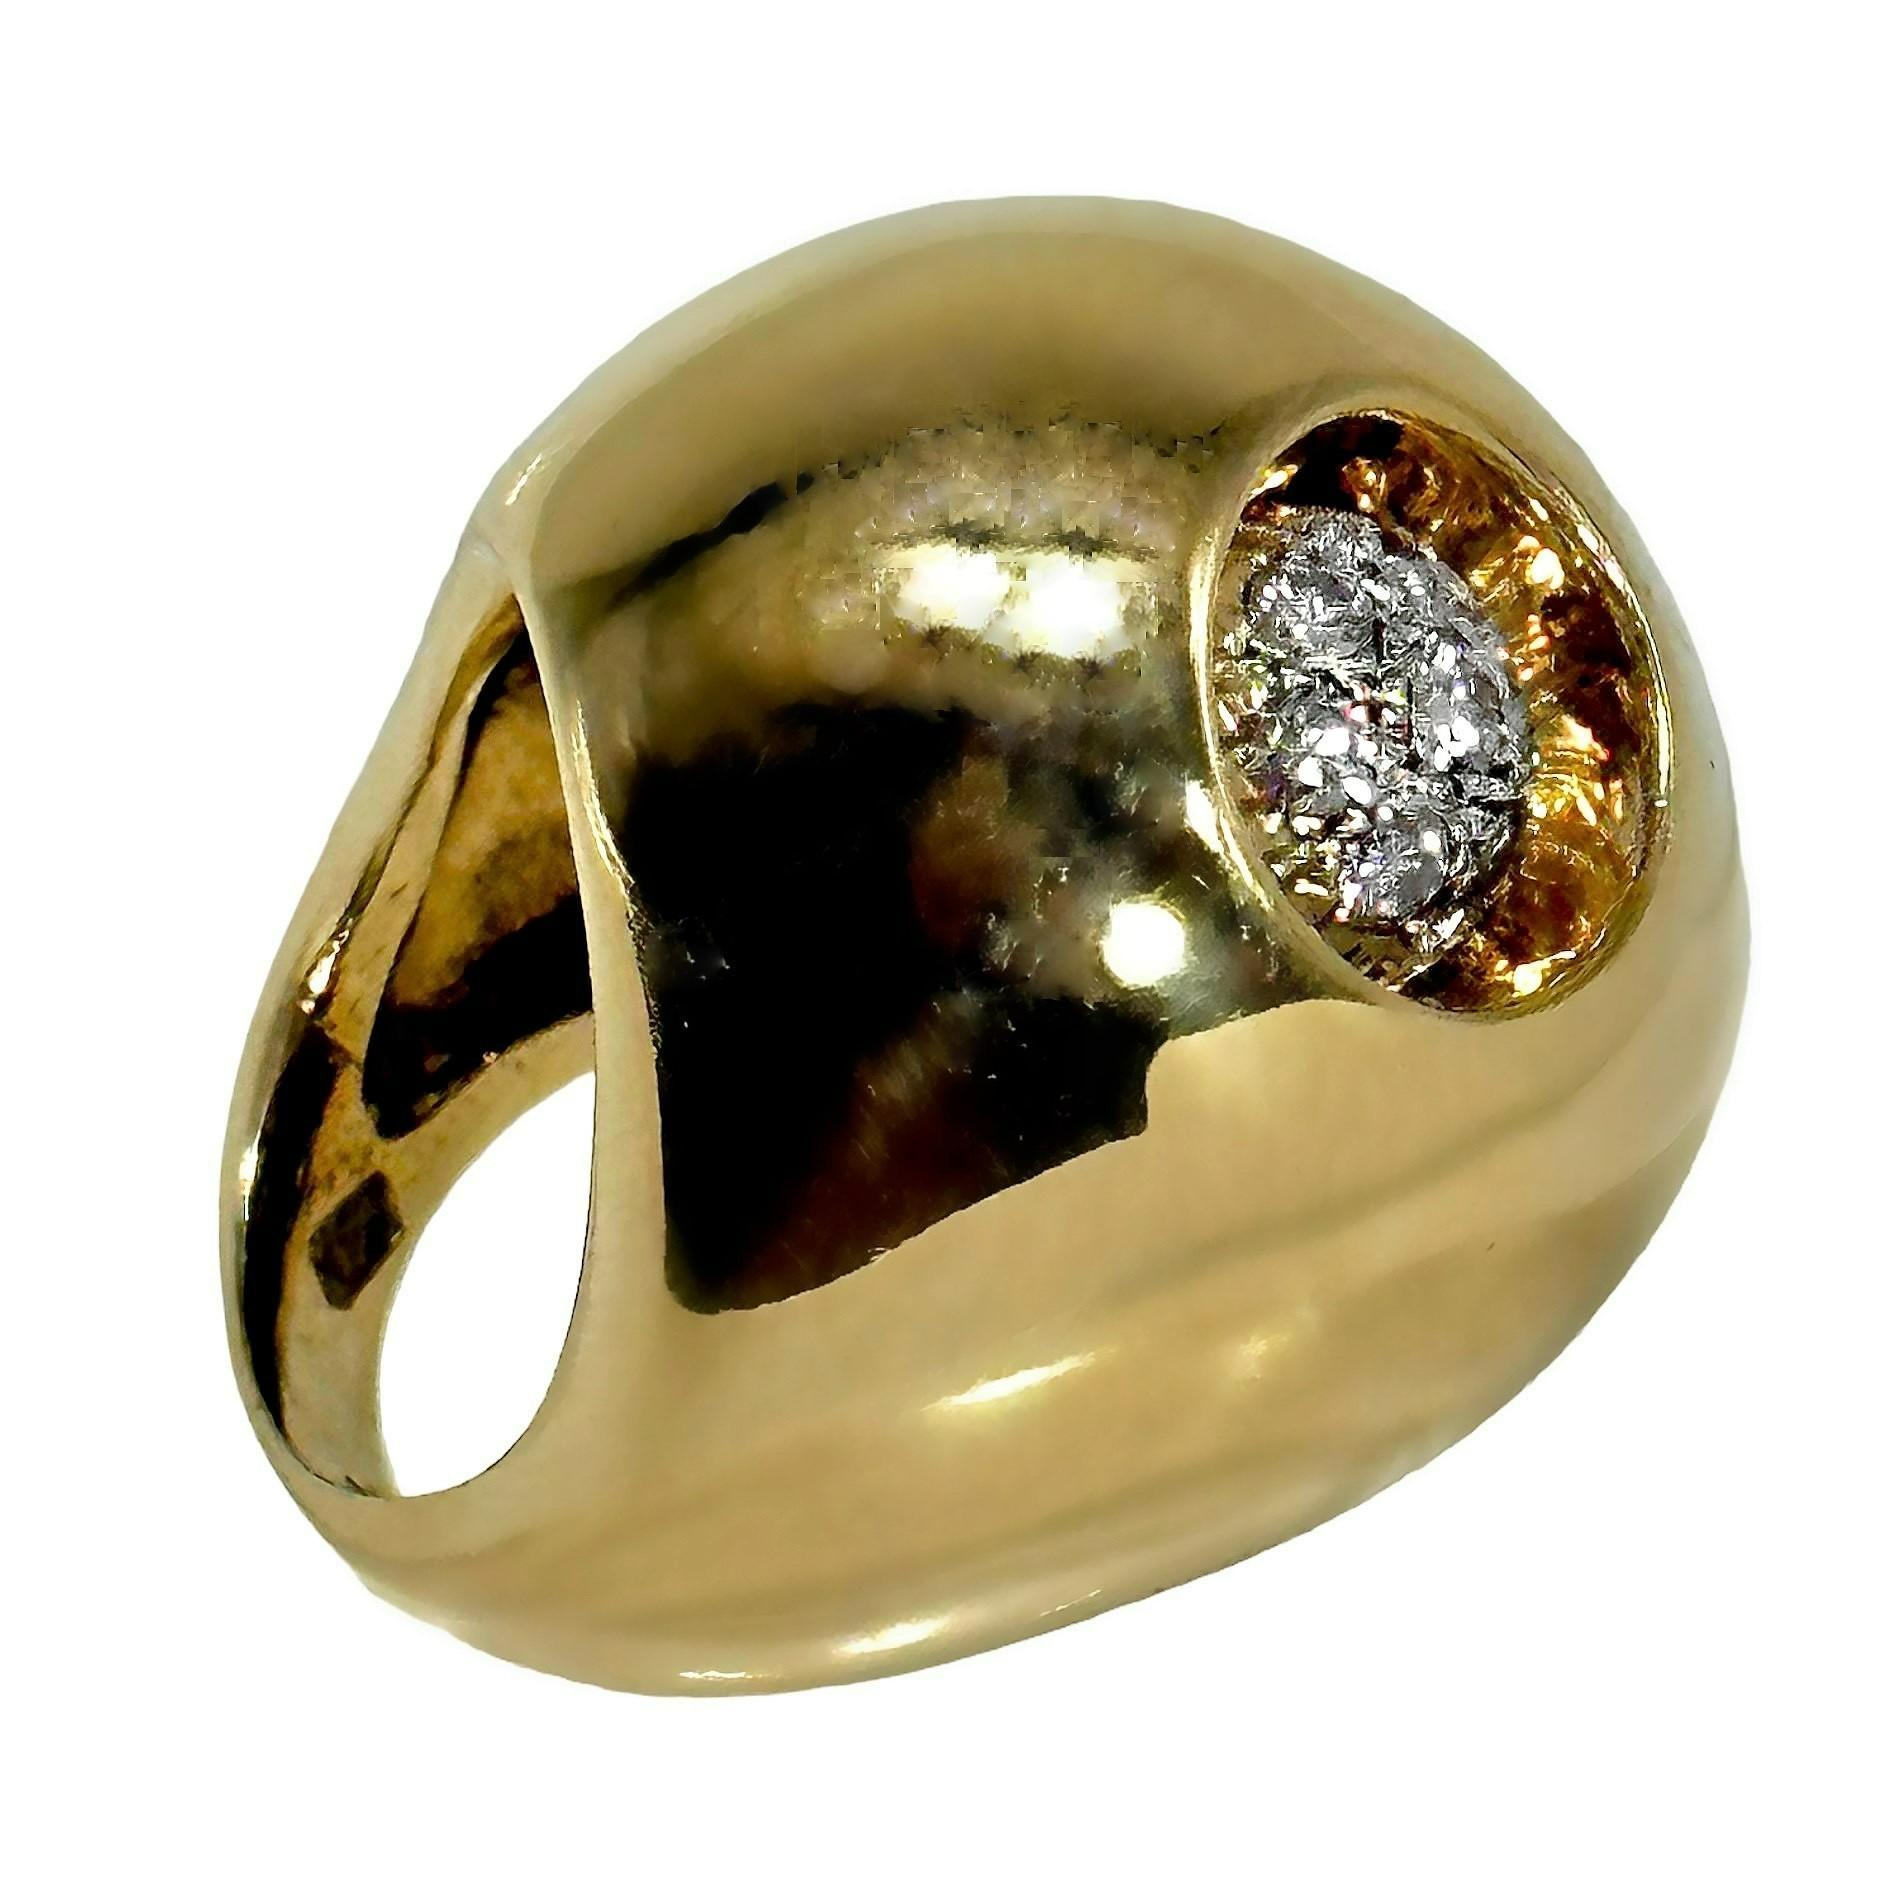 This powerful 14K yellow gold and diamond Modernist ring has a dome that rises more than 1/2 inch above the finger, a length of over 1 1/8 inches and width of 1 inch. Off to one side and deeply recessed is a grouping of eight brilliant cut diamonds